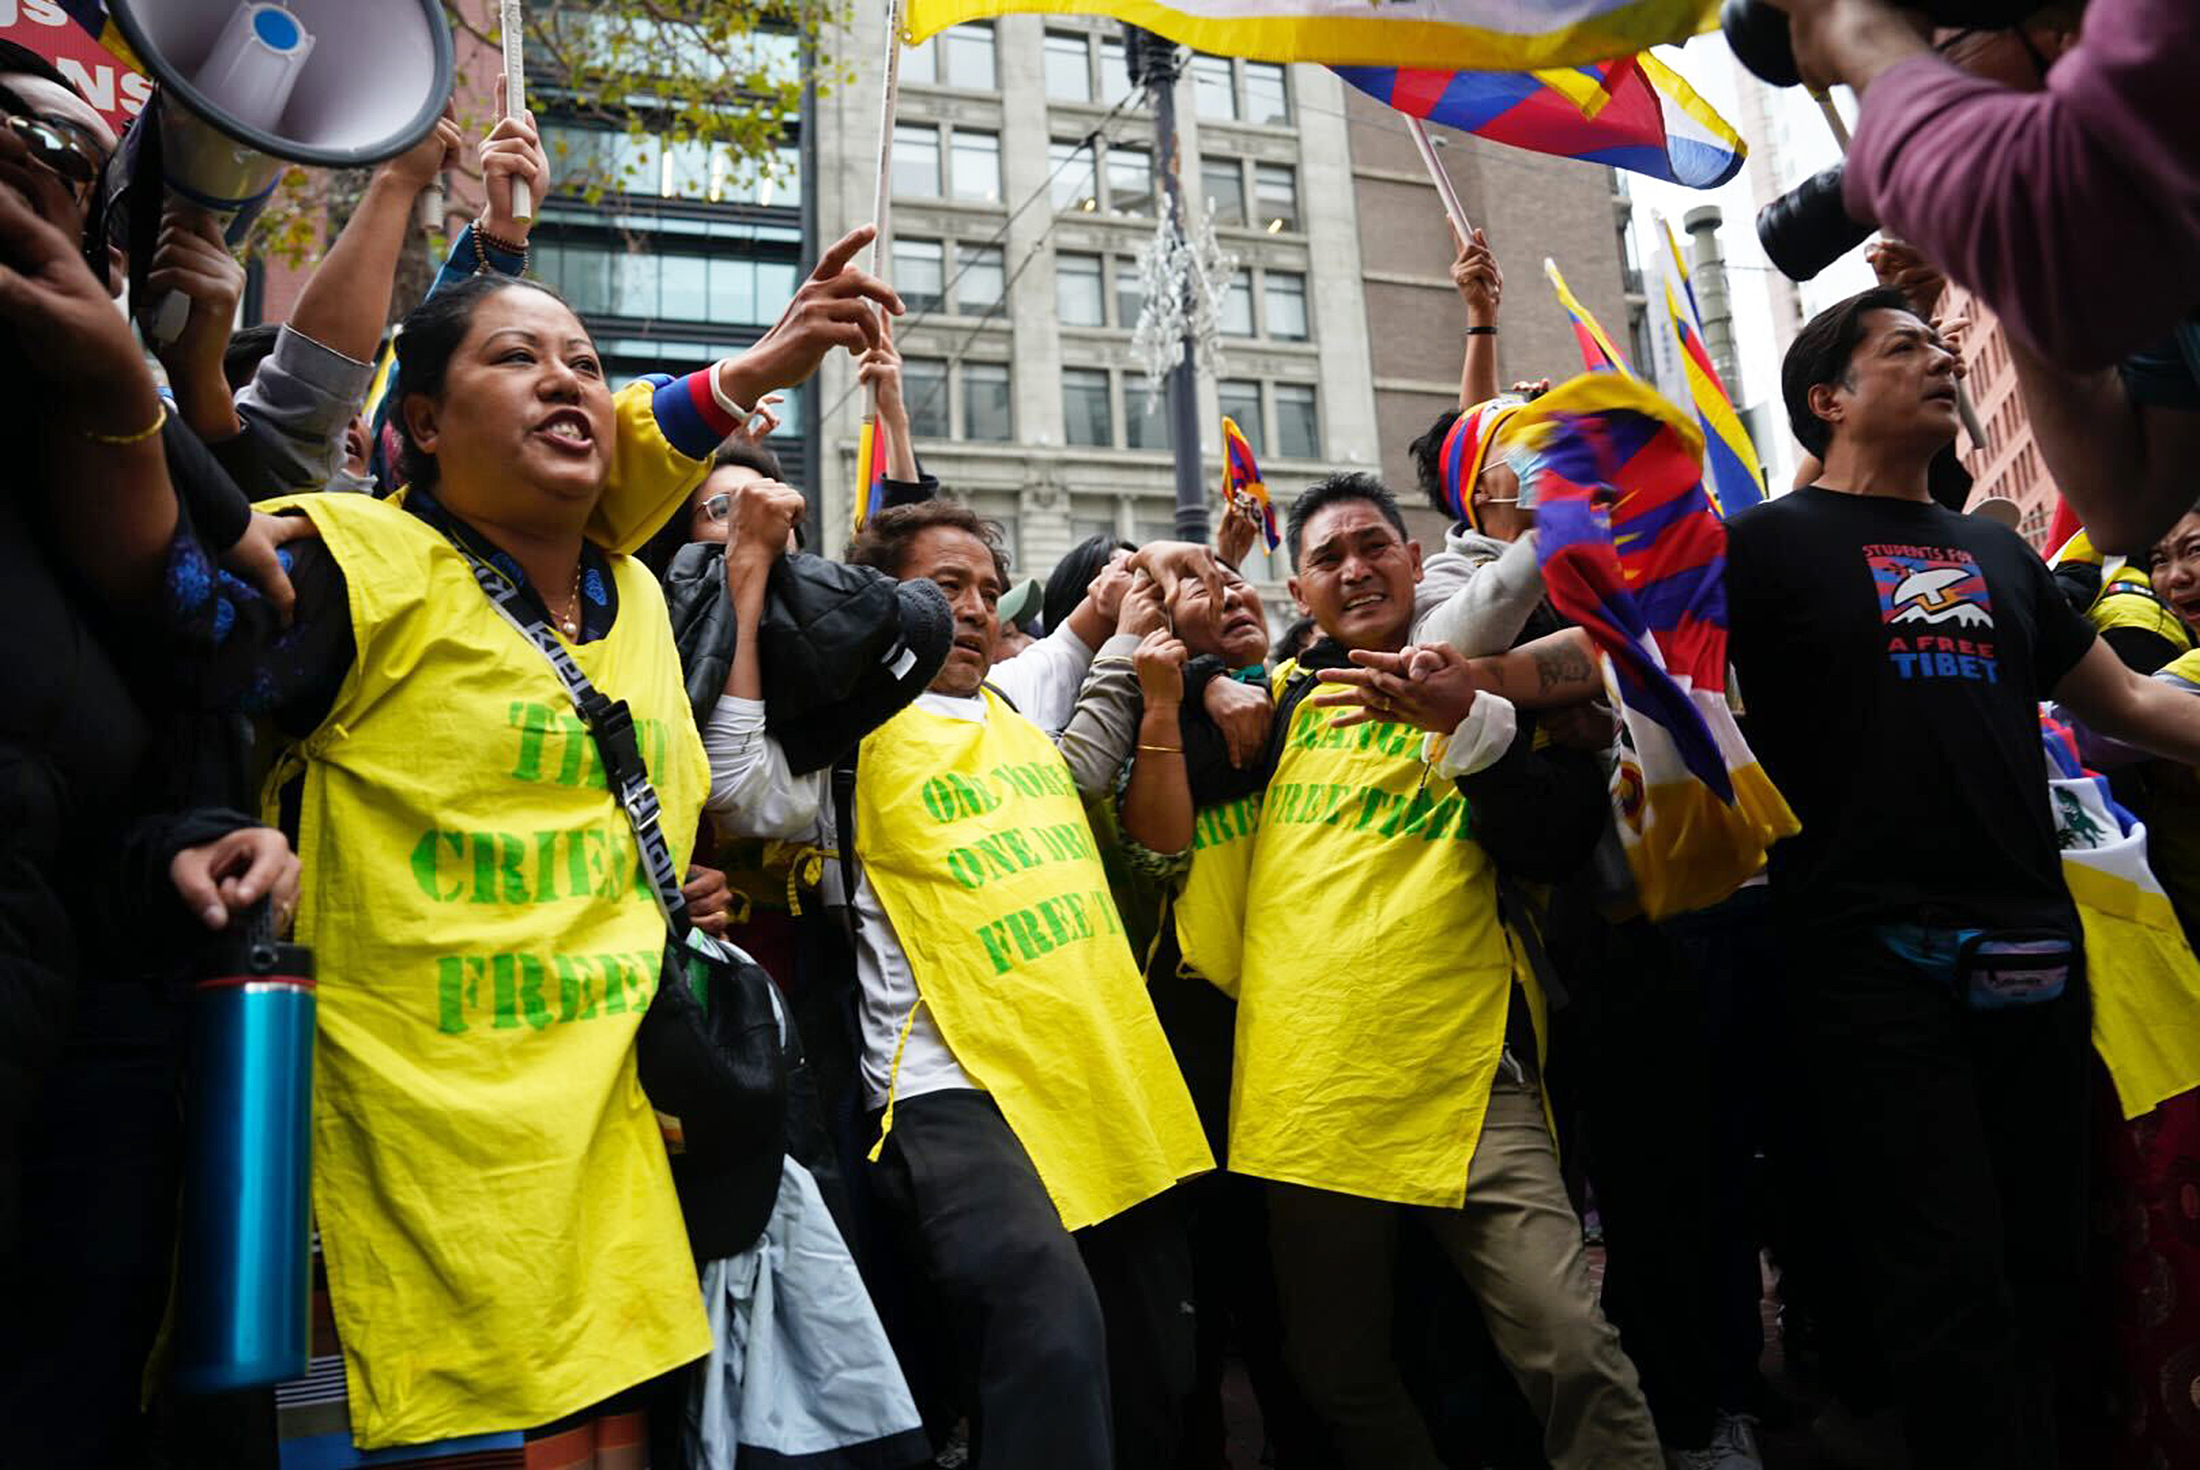 A group of people link arms during a protest with Tibetan flags in the background.